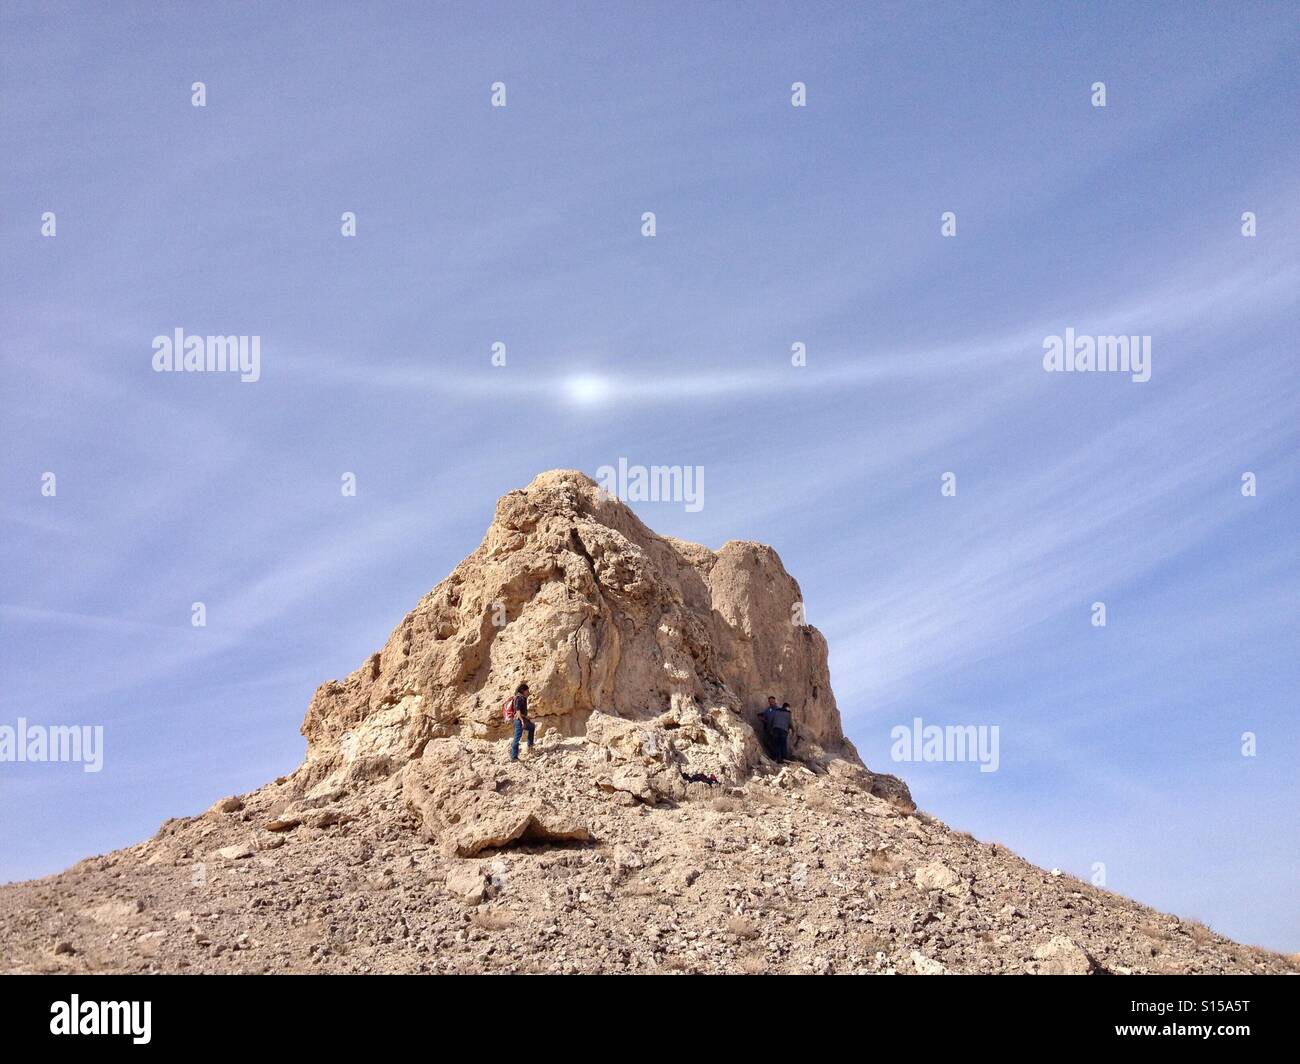 Woman hiking at Trona Pinnacles, California with natural halo effect in sky Stock Photo